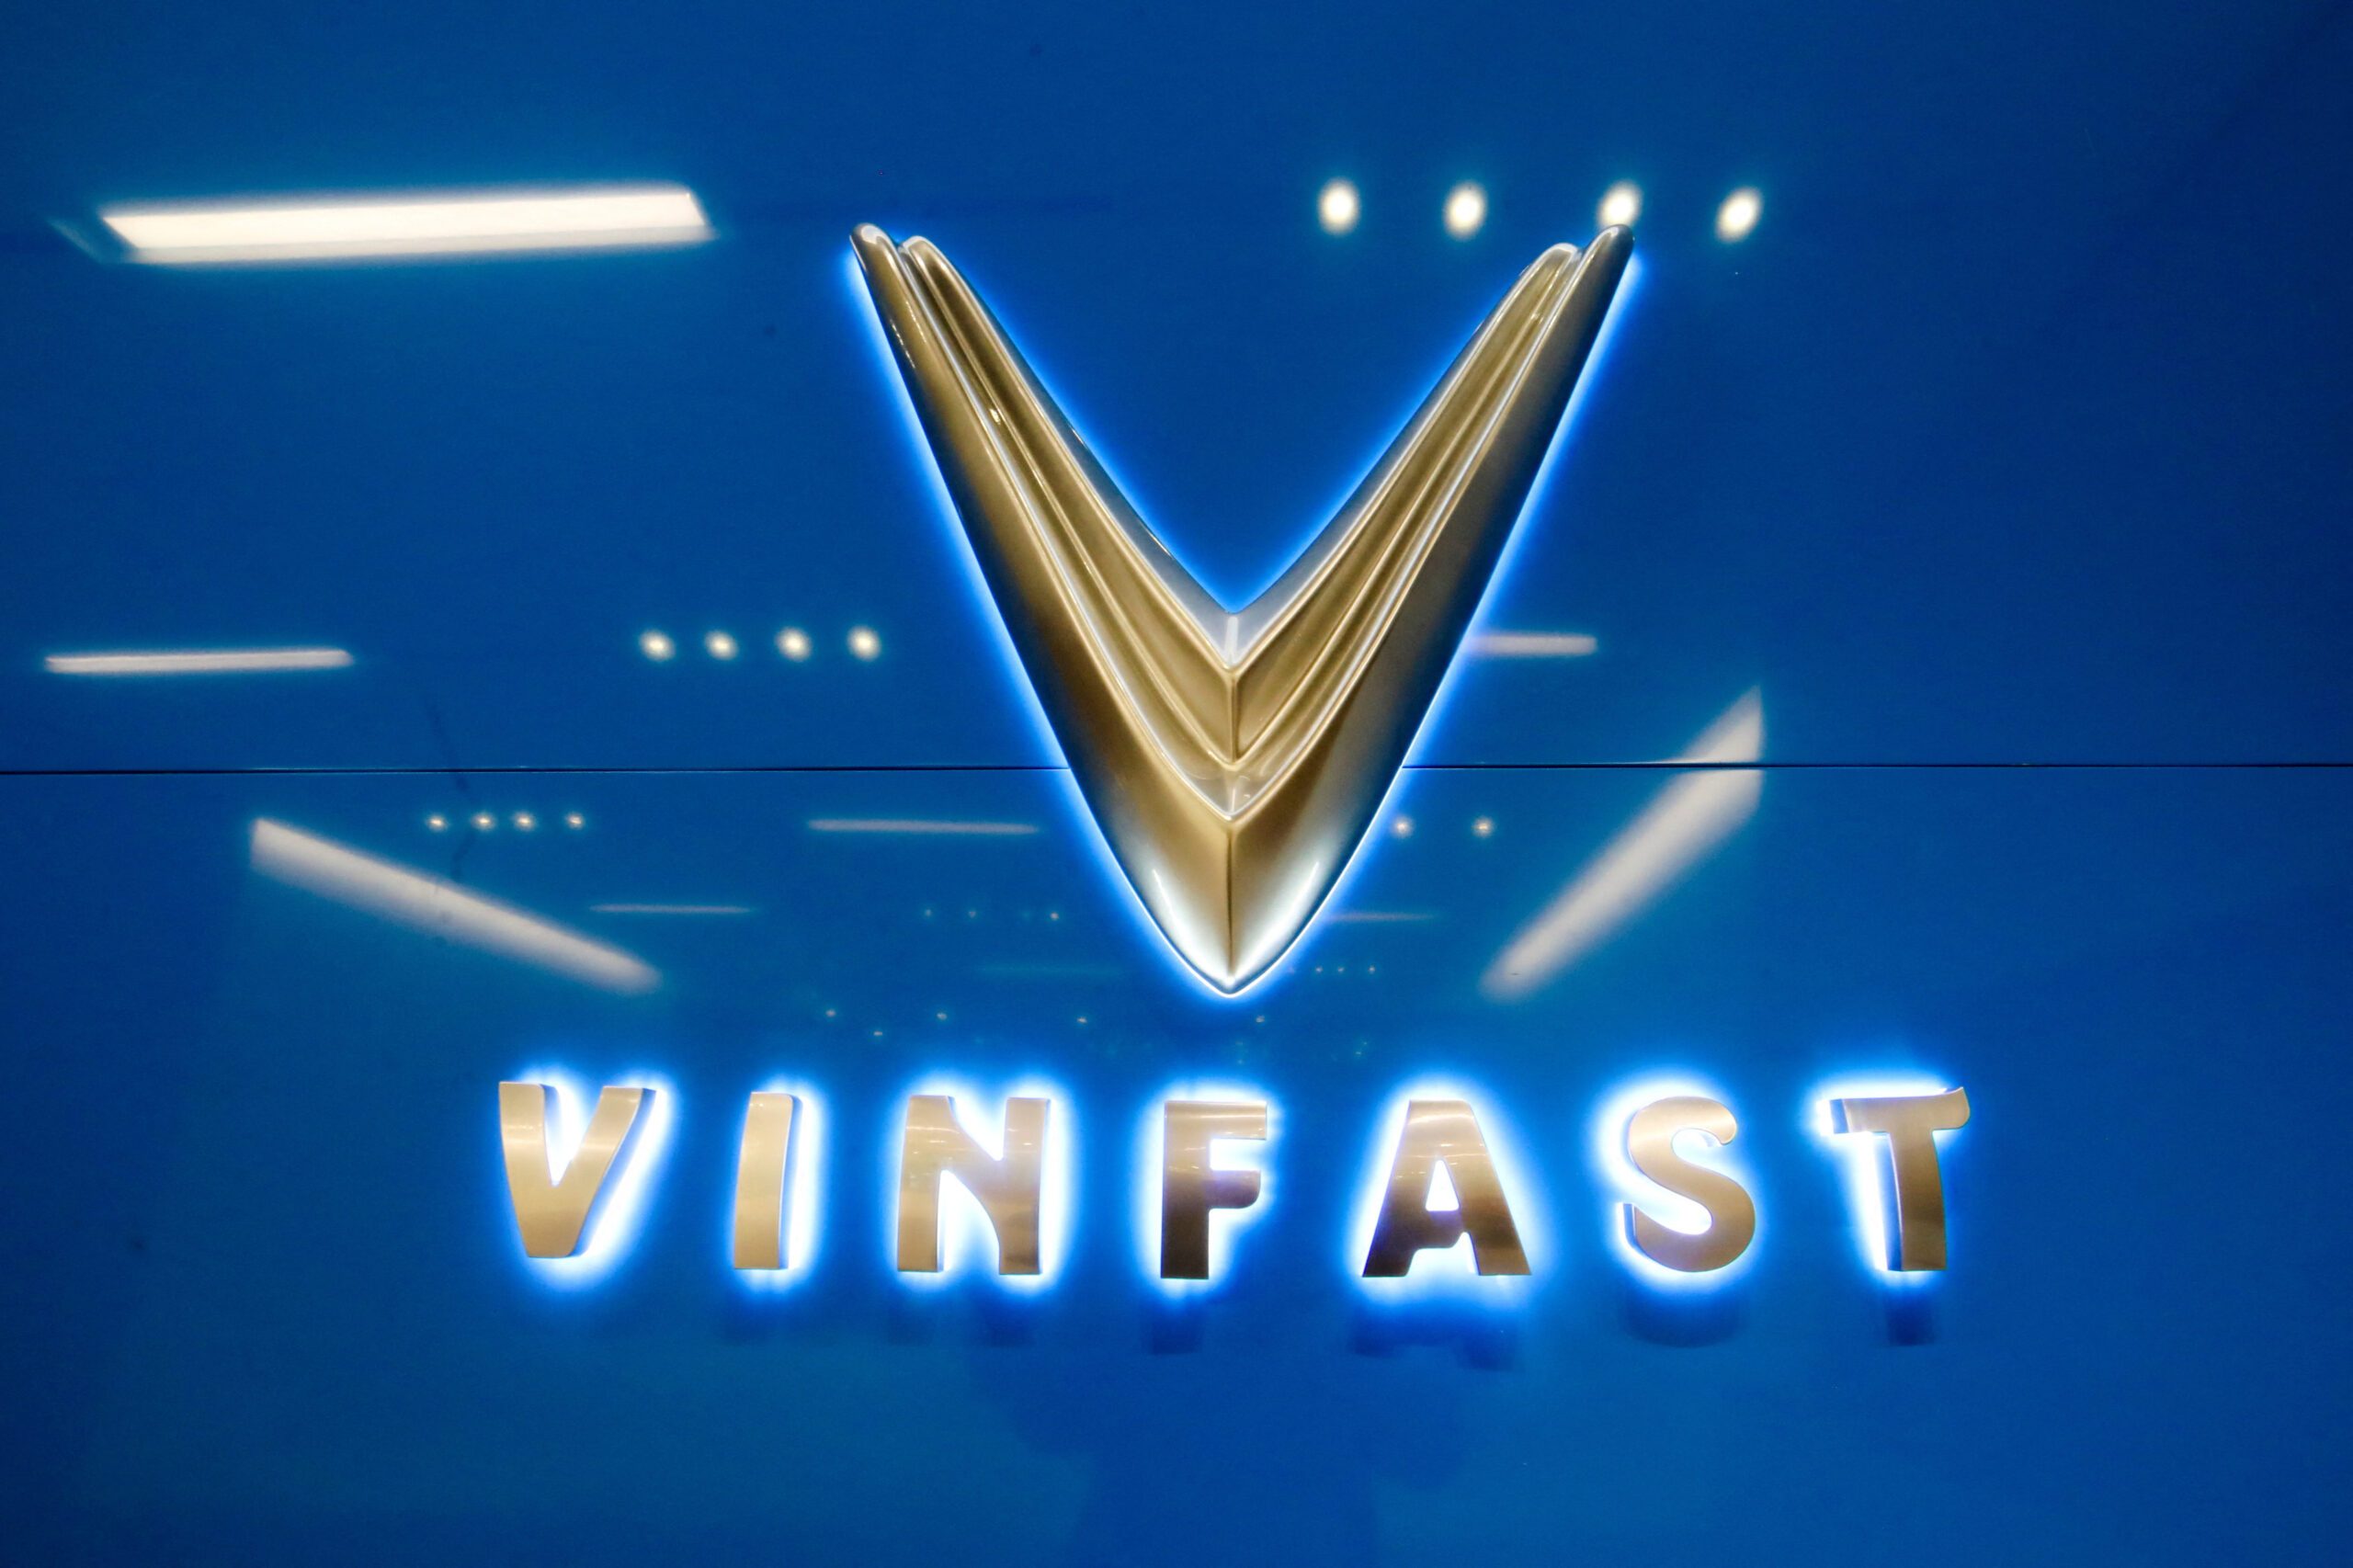 Vietnam's VinFast taps family offices to get a lift from potential investors